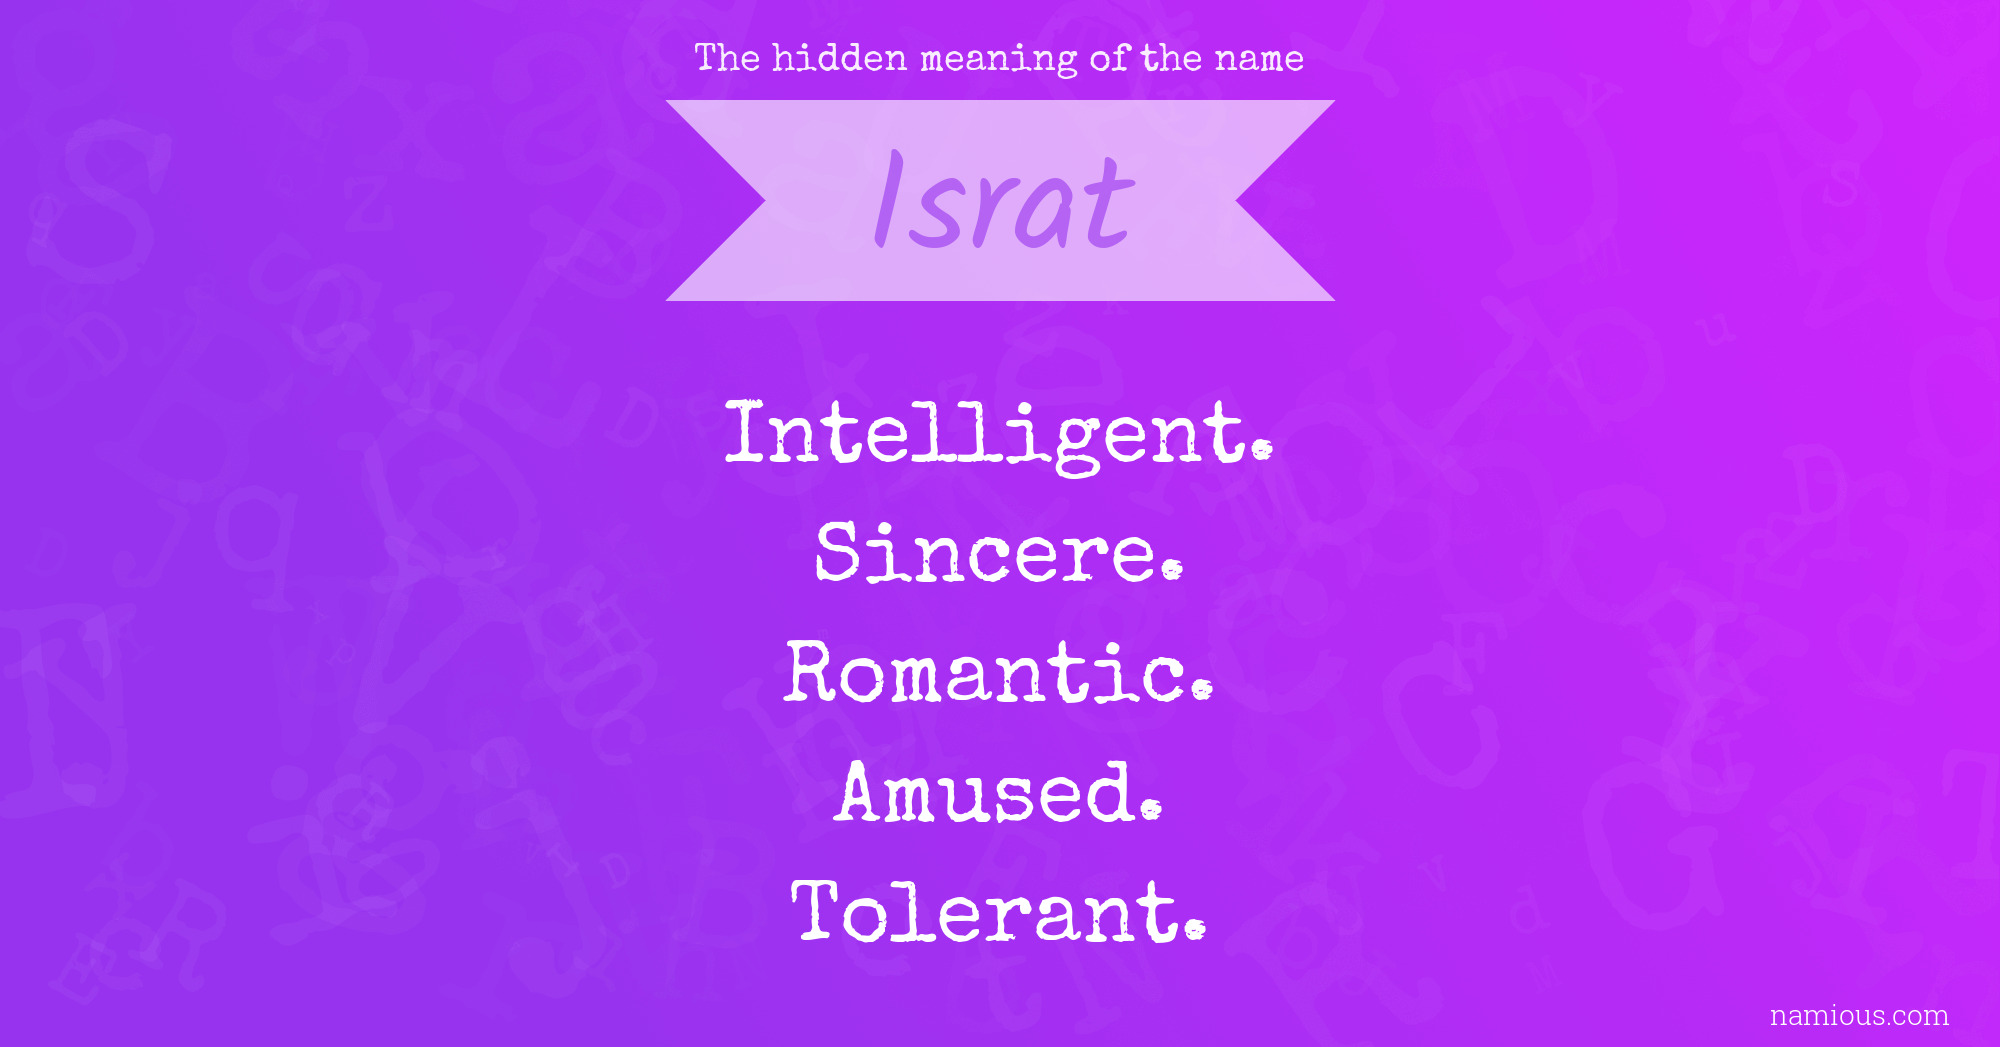 The hidden meaning of the name Israt